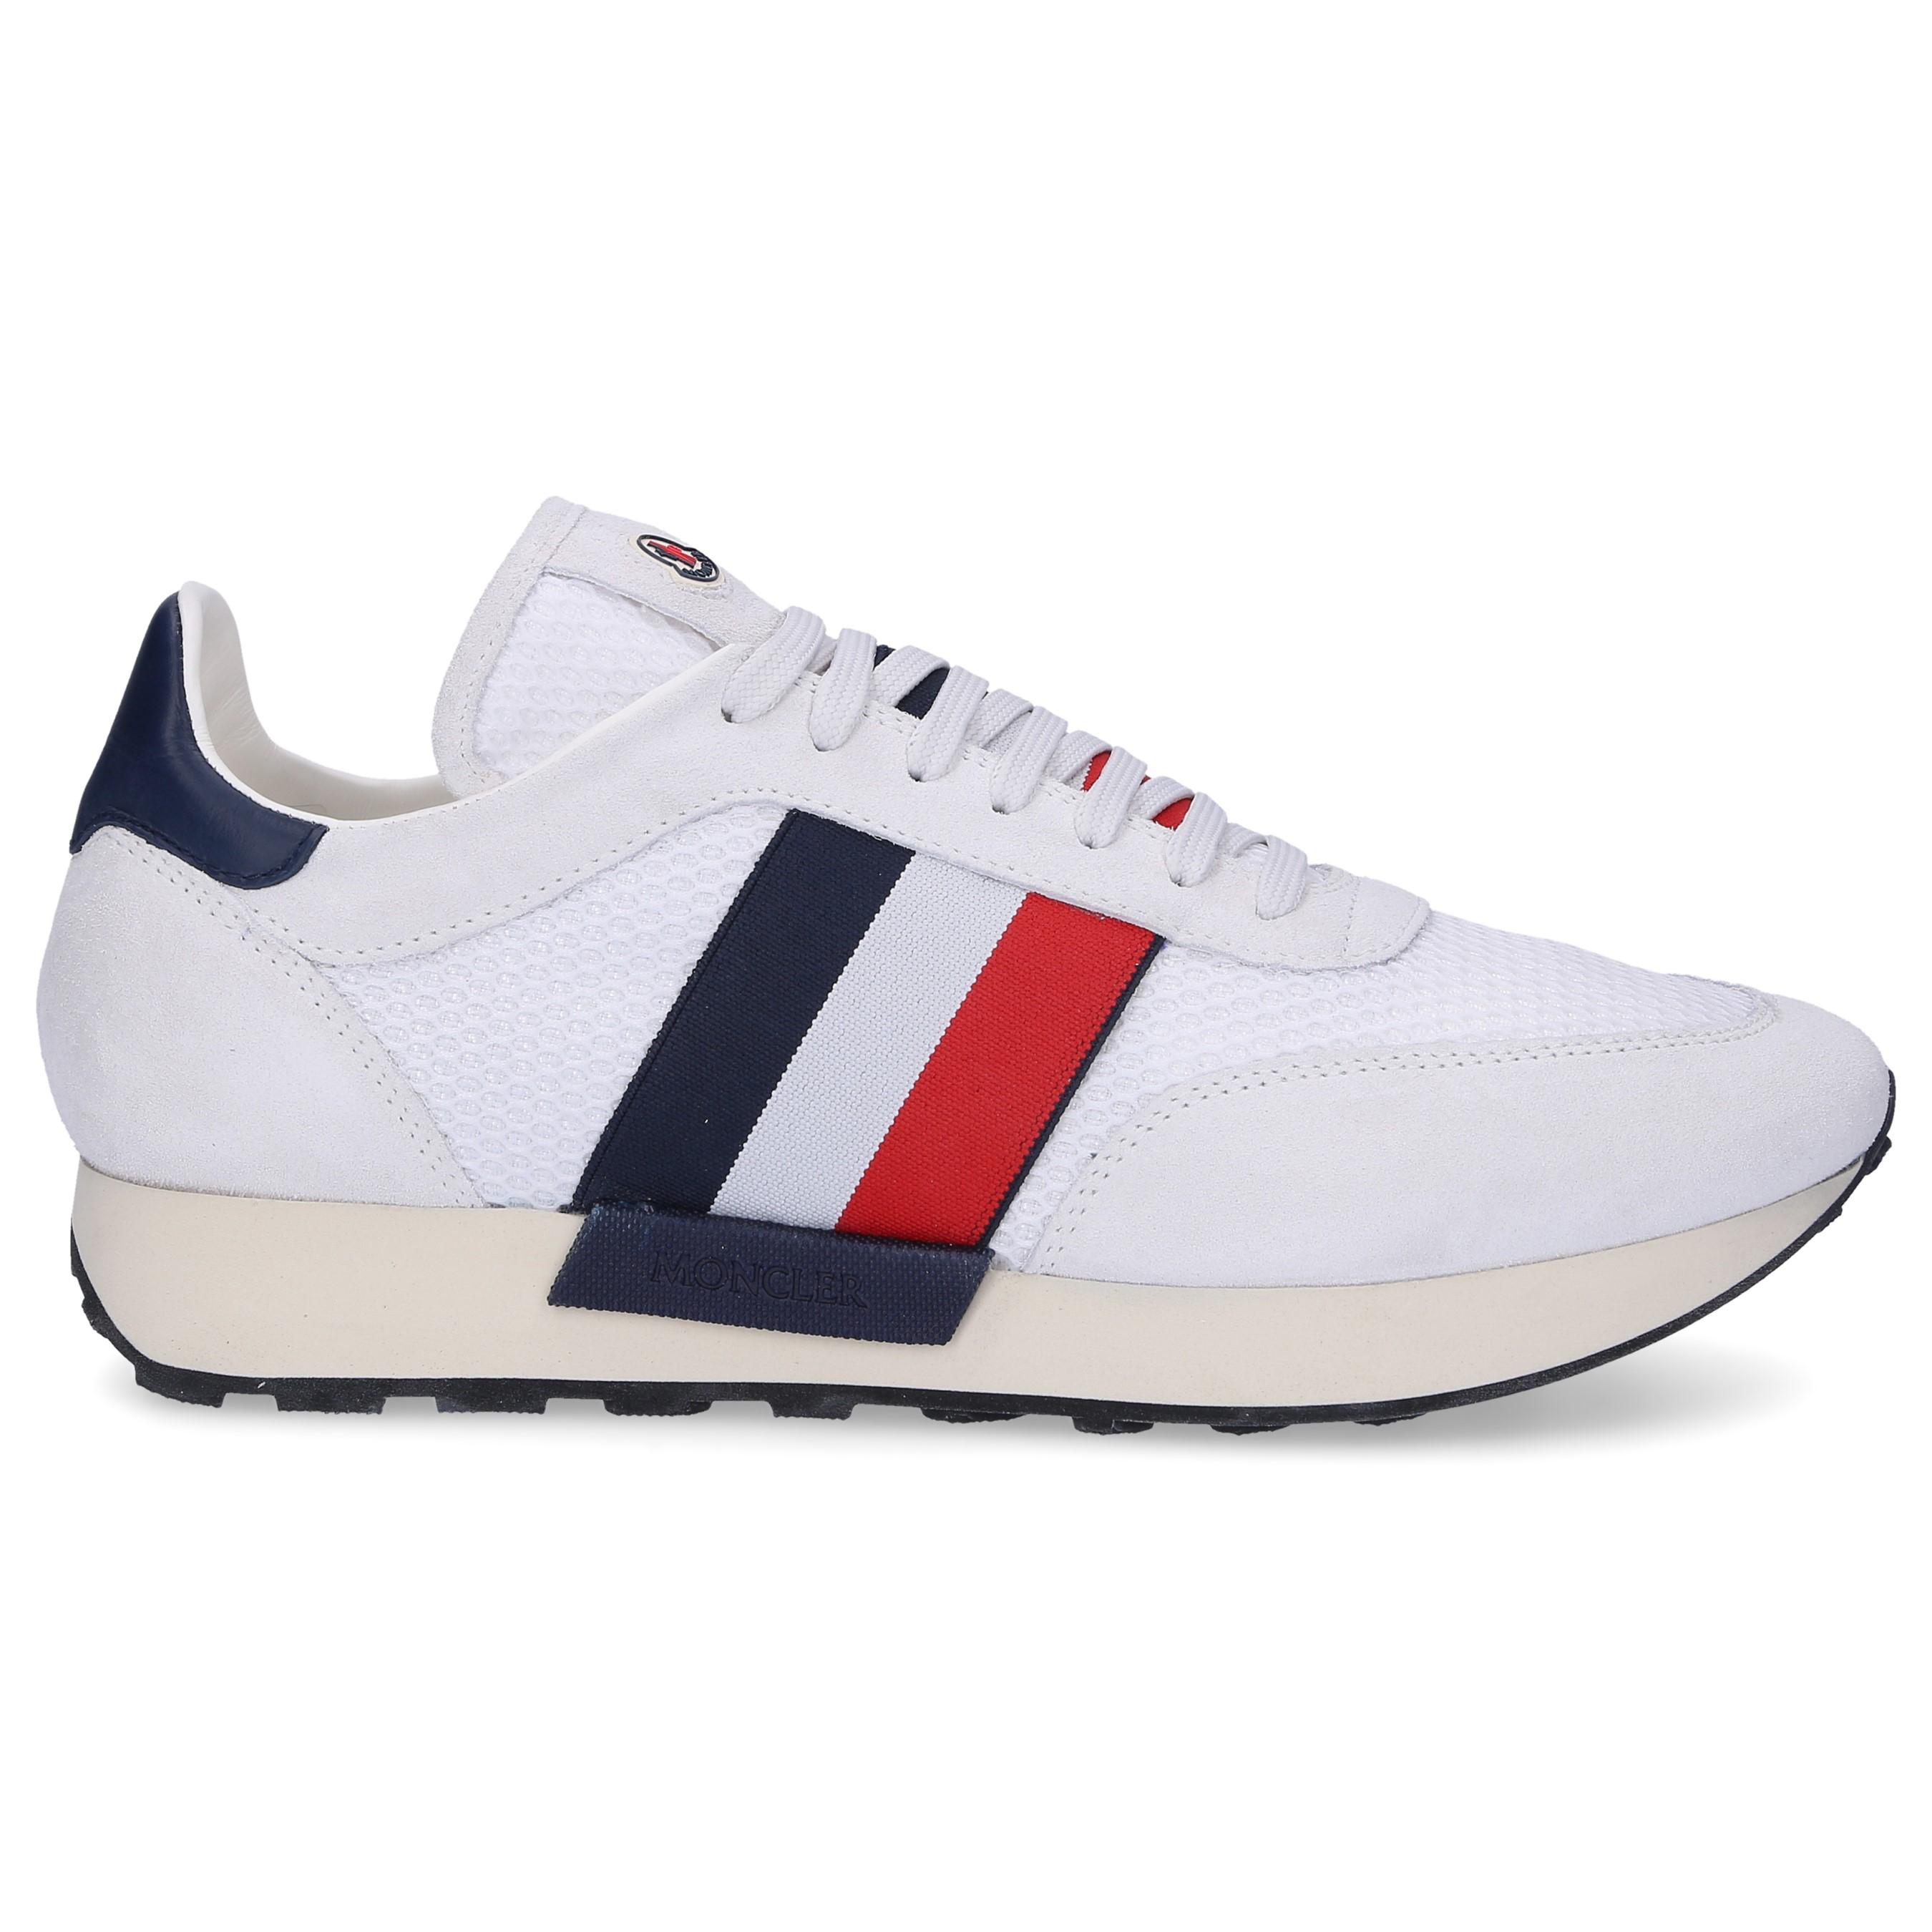 Moncler Horace Sneakers for Men | Lyst